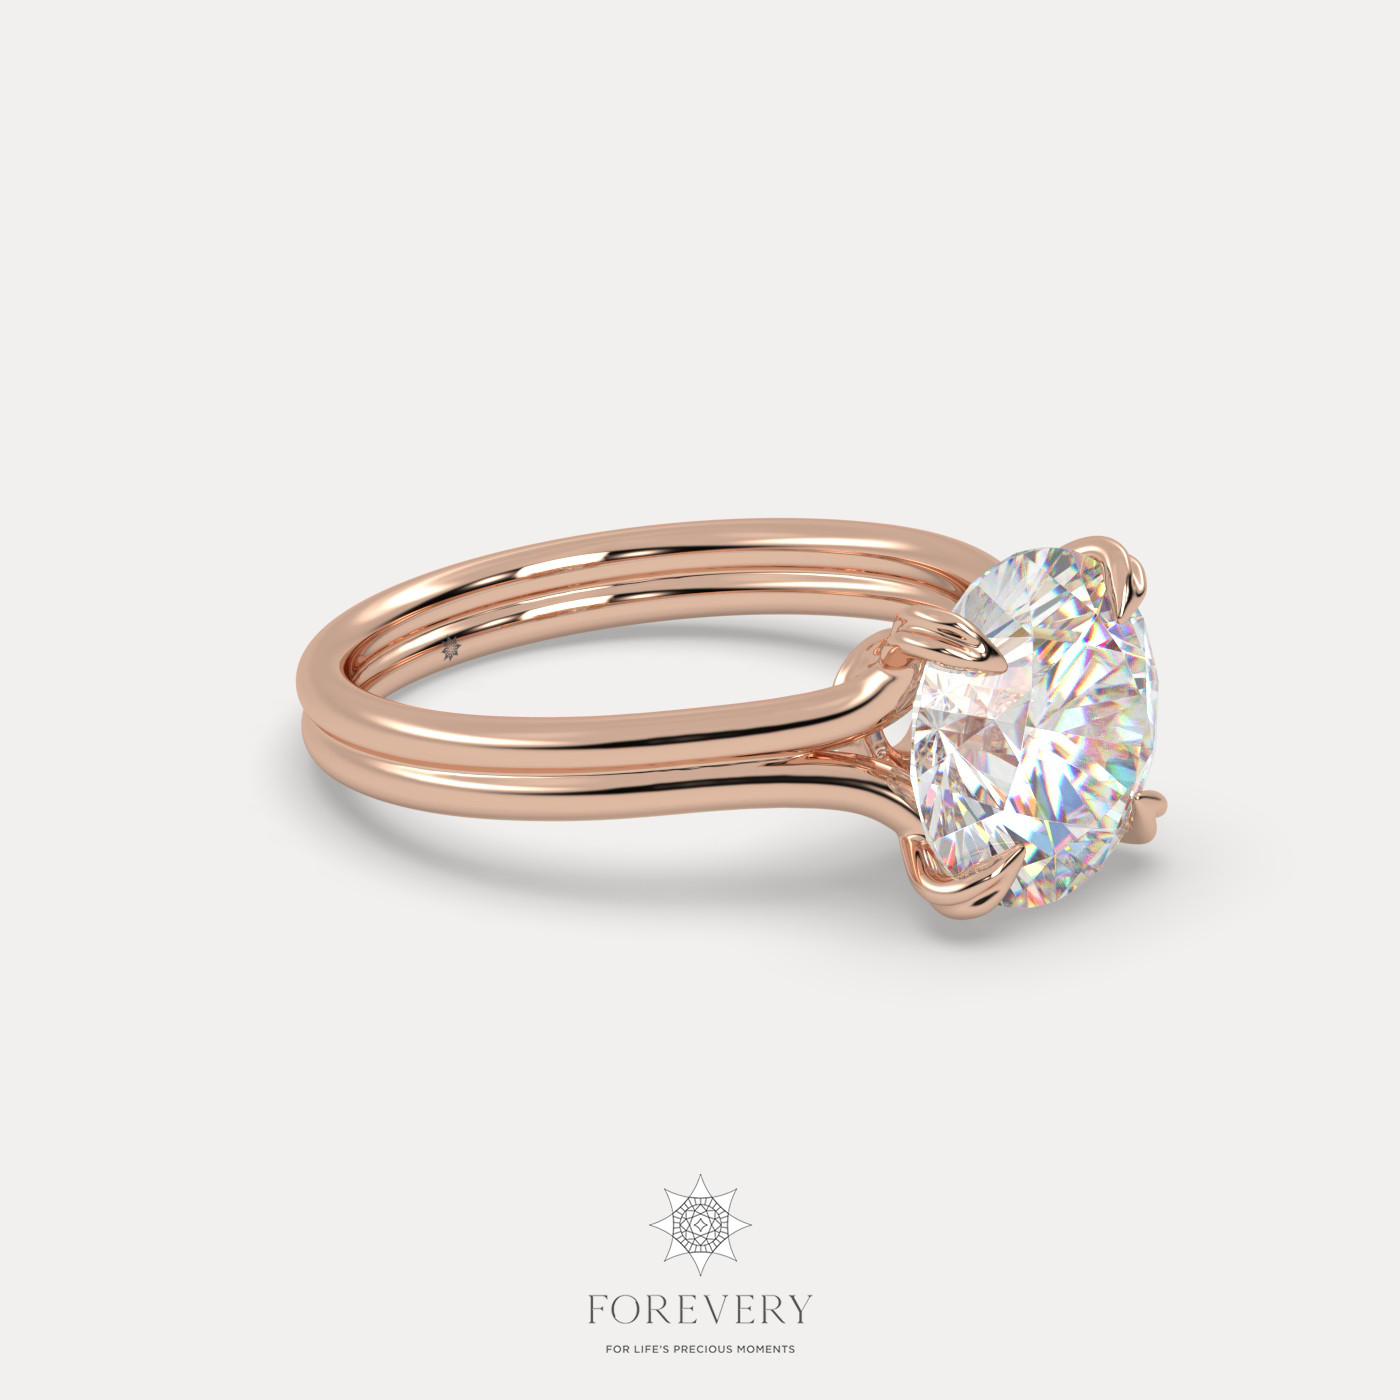 18K ROSE GOLD Round Cut Diamond Solitaire Engagament Ring